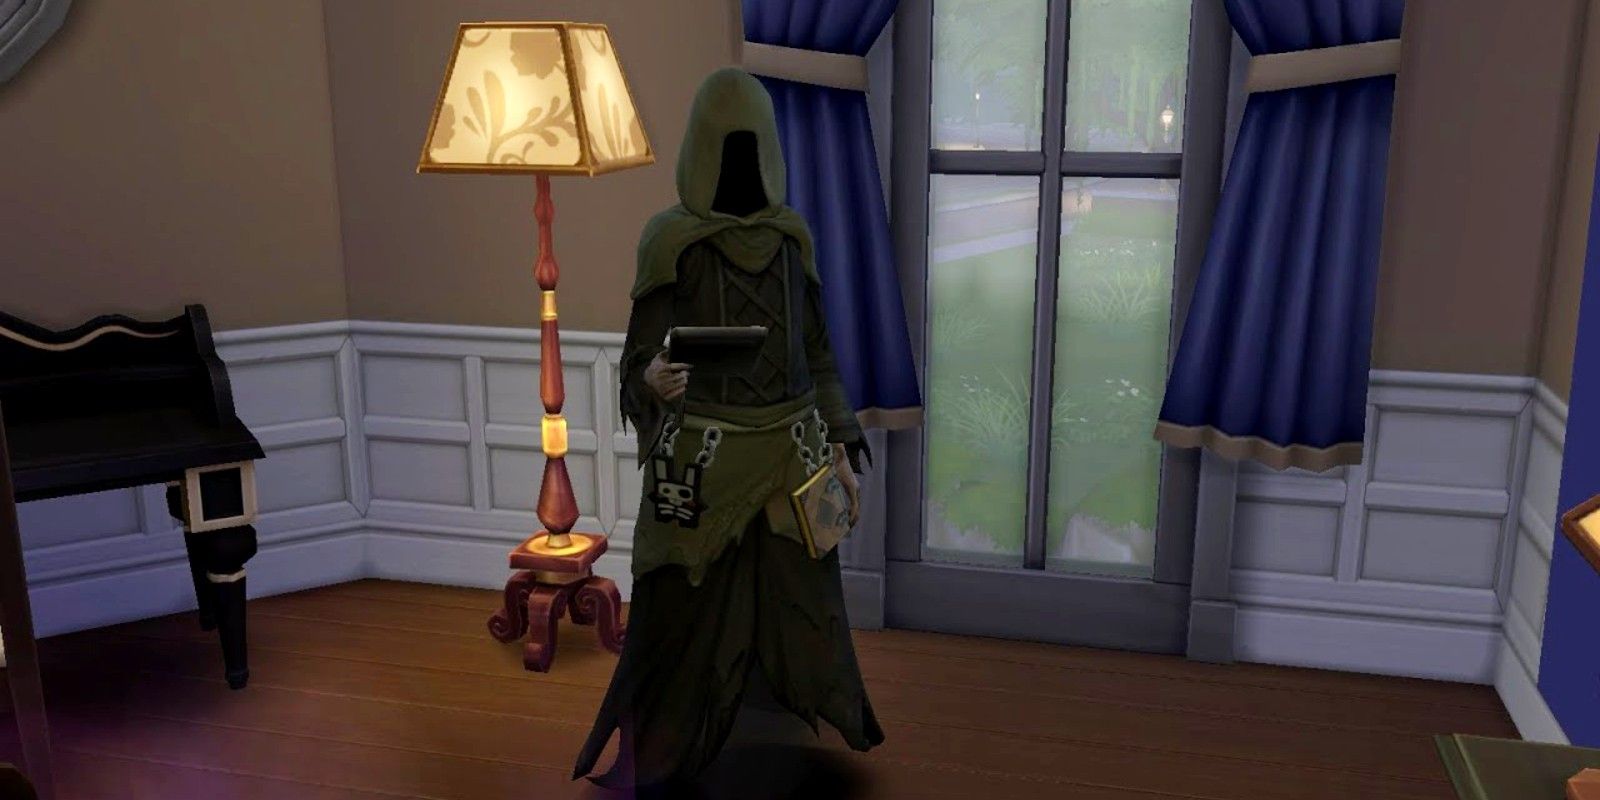 The Grim Reaper awaits a Sim's impending death in The Sims 4